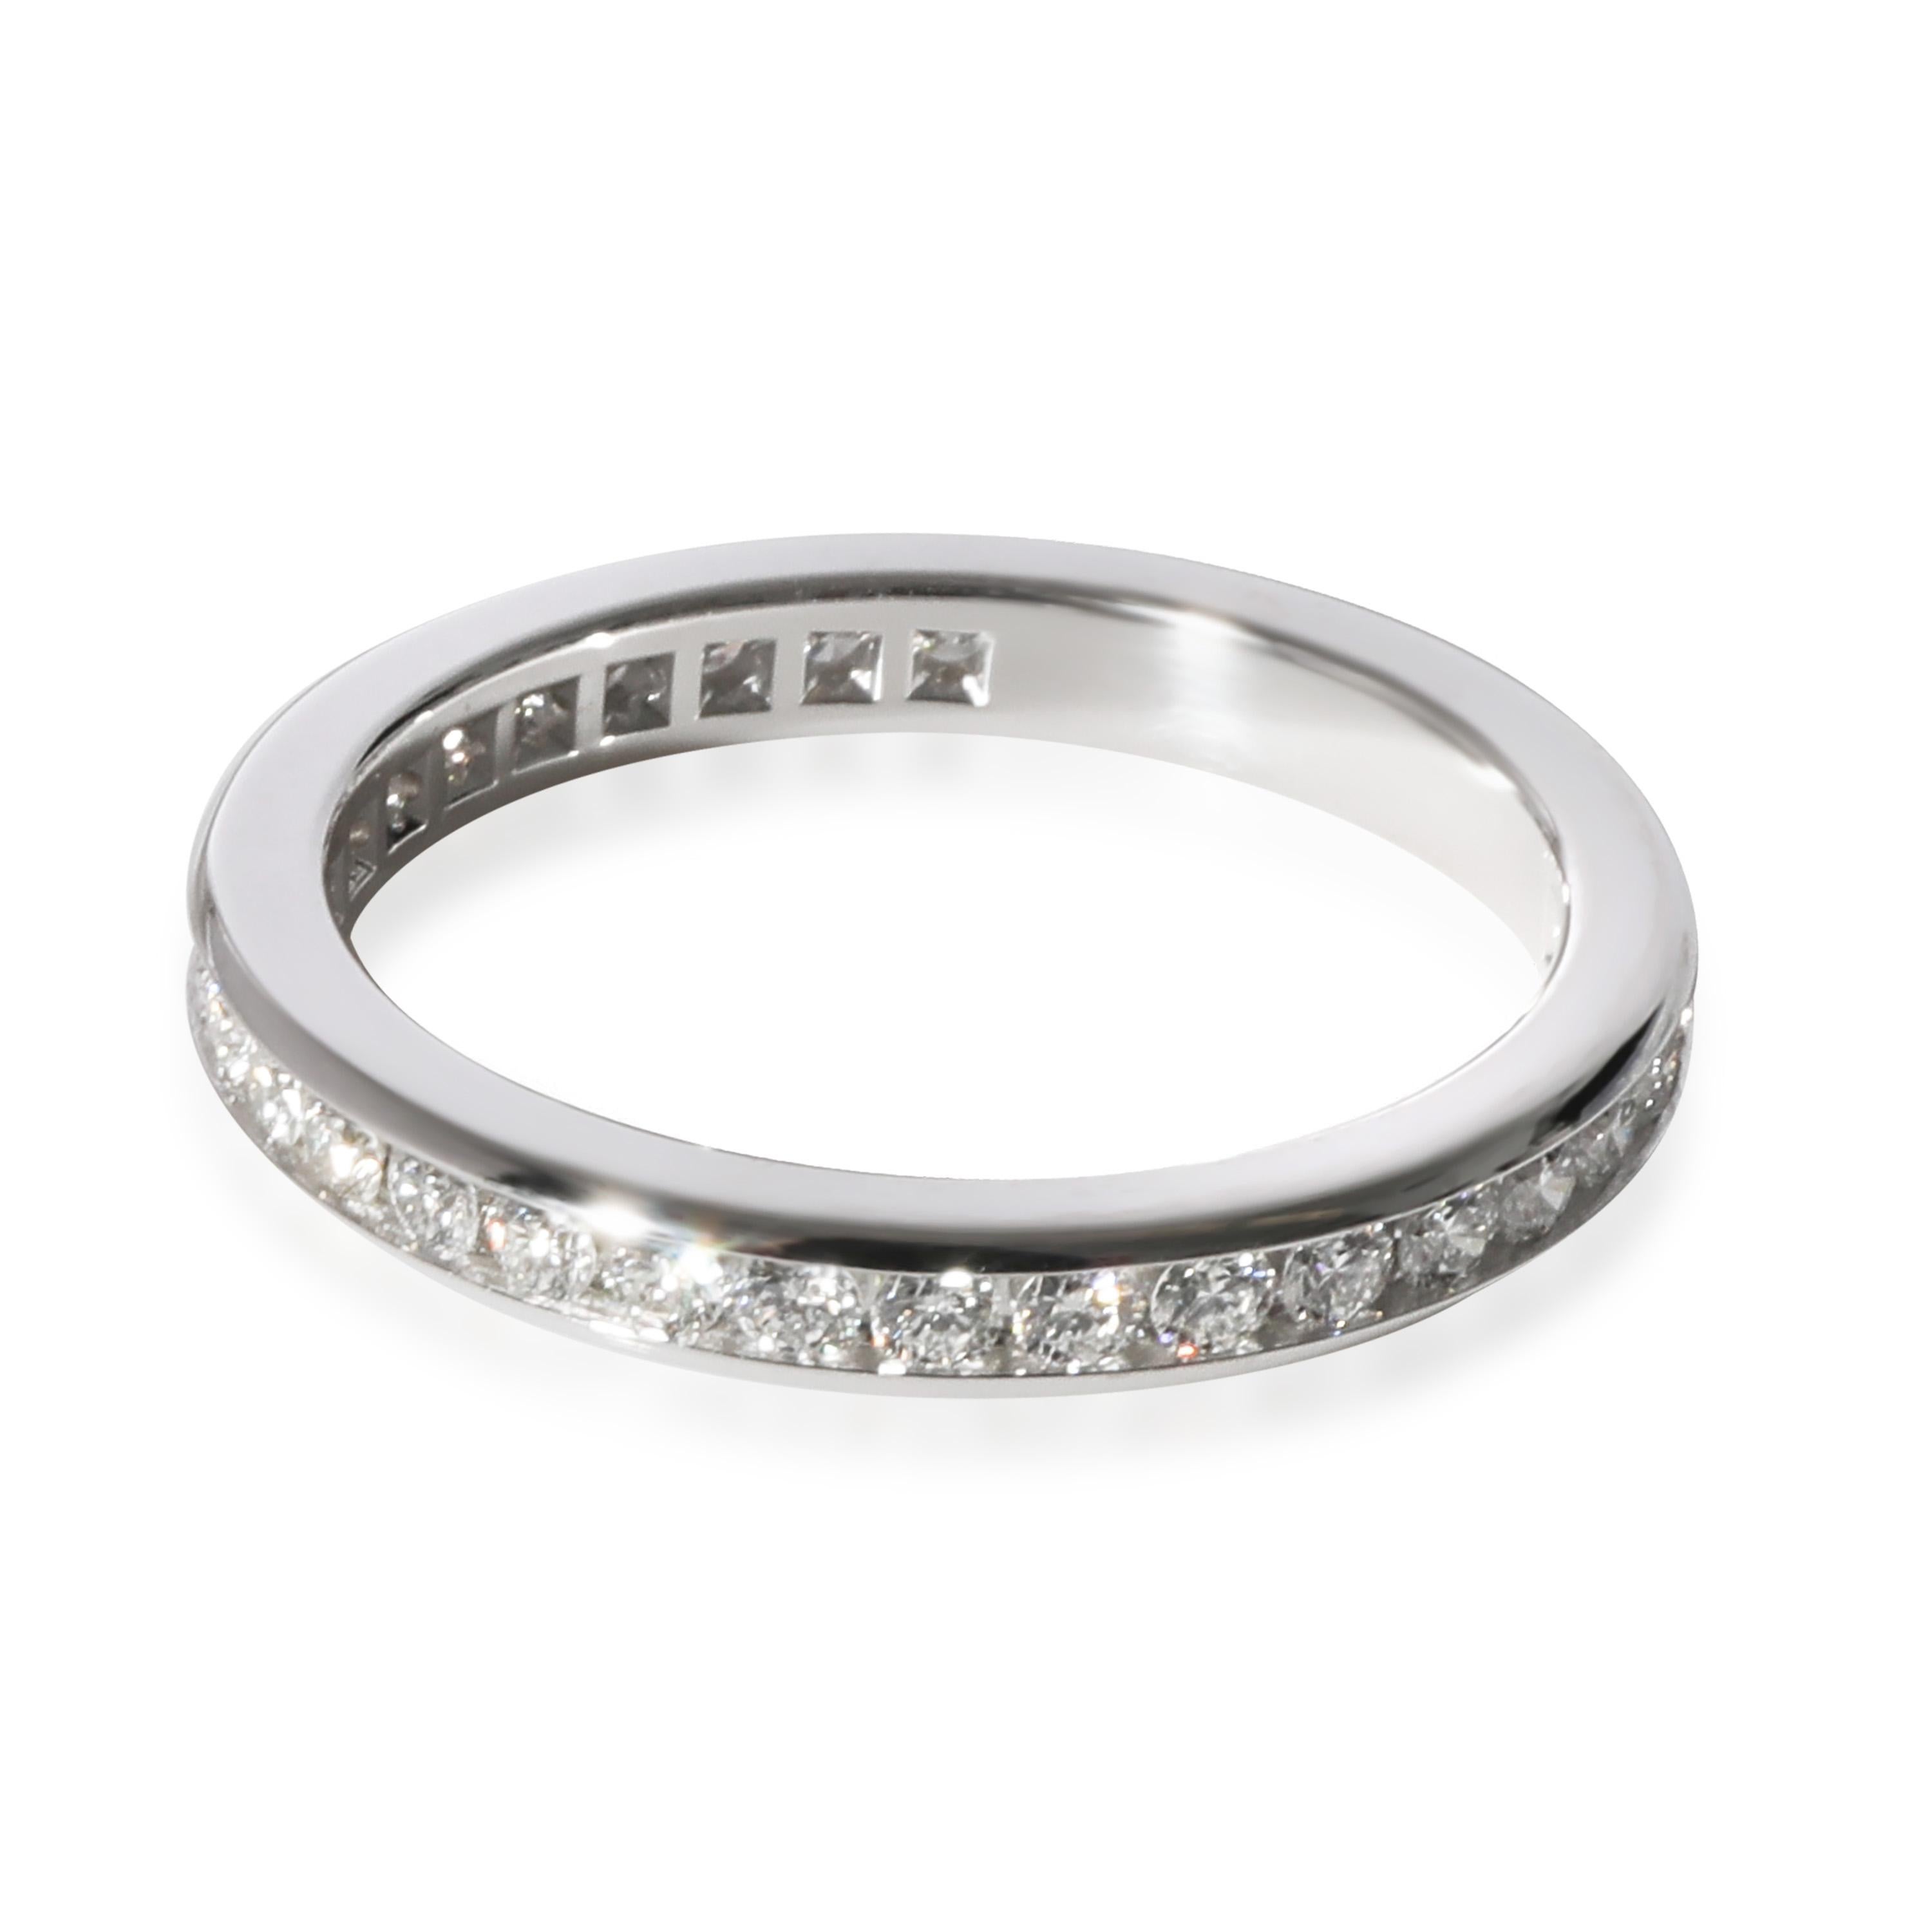 Tiffany & Co. Channel Set Diamond Eternity Band in Platinum 0.56 CTW
 
 PRIMARY DETAILS
 SKU: 128529
 Listing Title: Tiffany & Co. Channel Set Diamond Eternity Band in Platinum 0.56 CTW
 Condition Description: Tiffany reinvents a classic with the